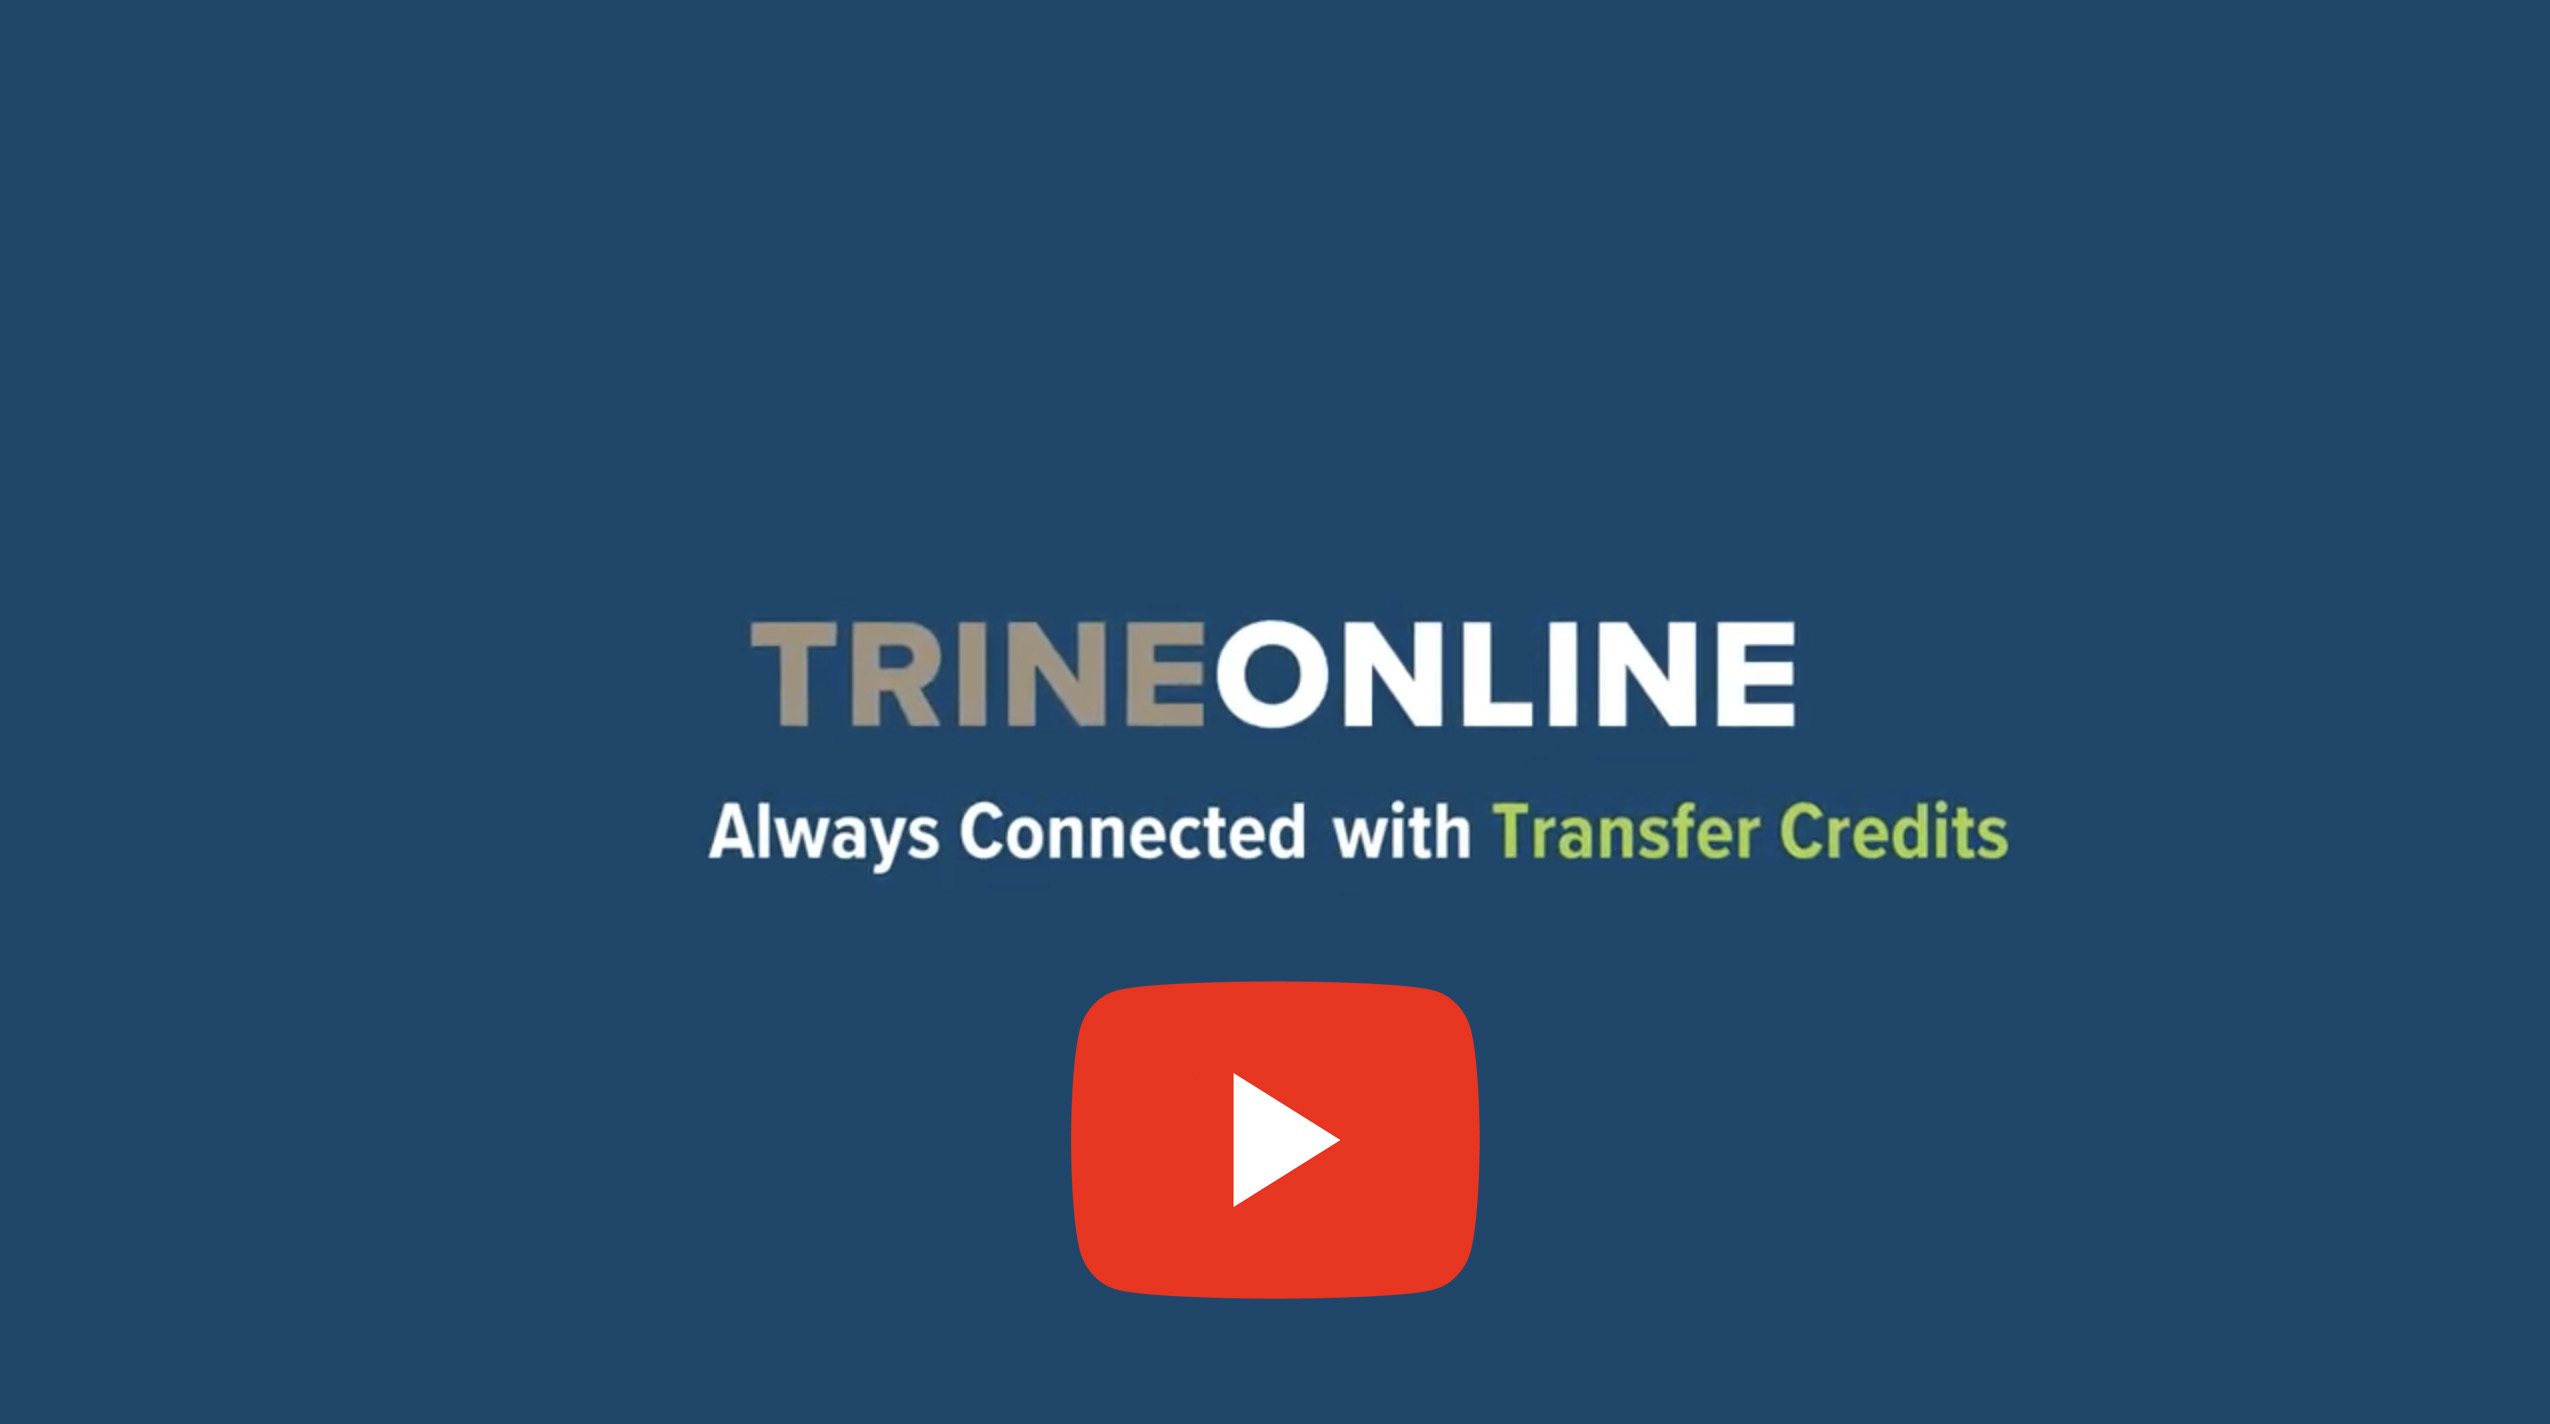 Learn about transfer credits with this video